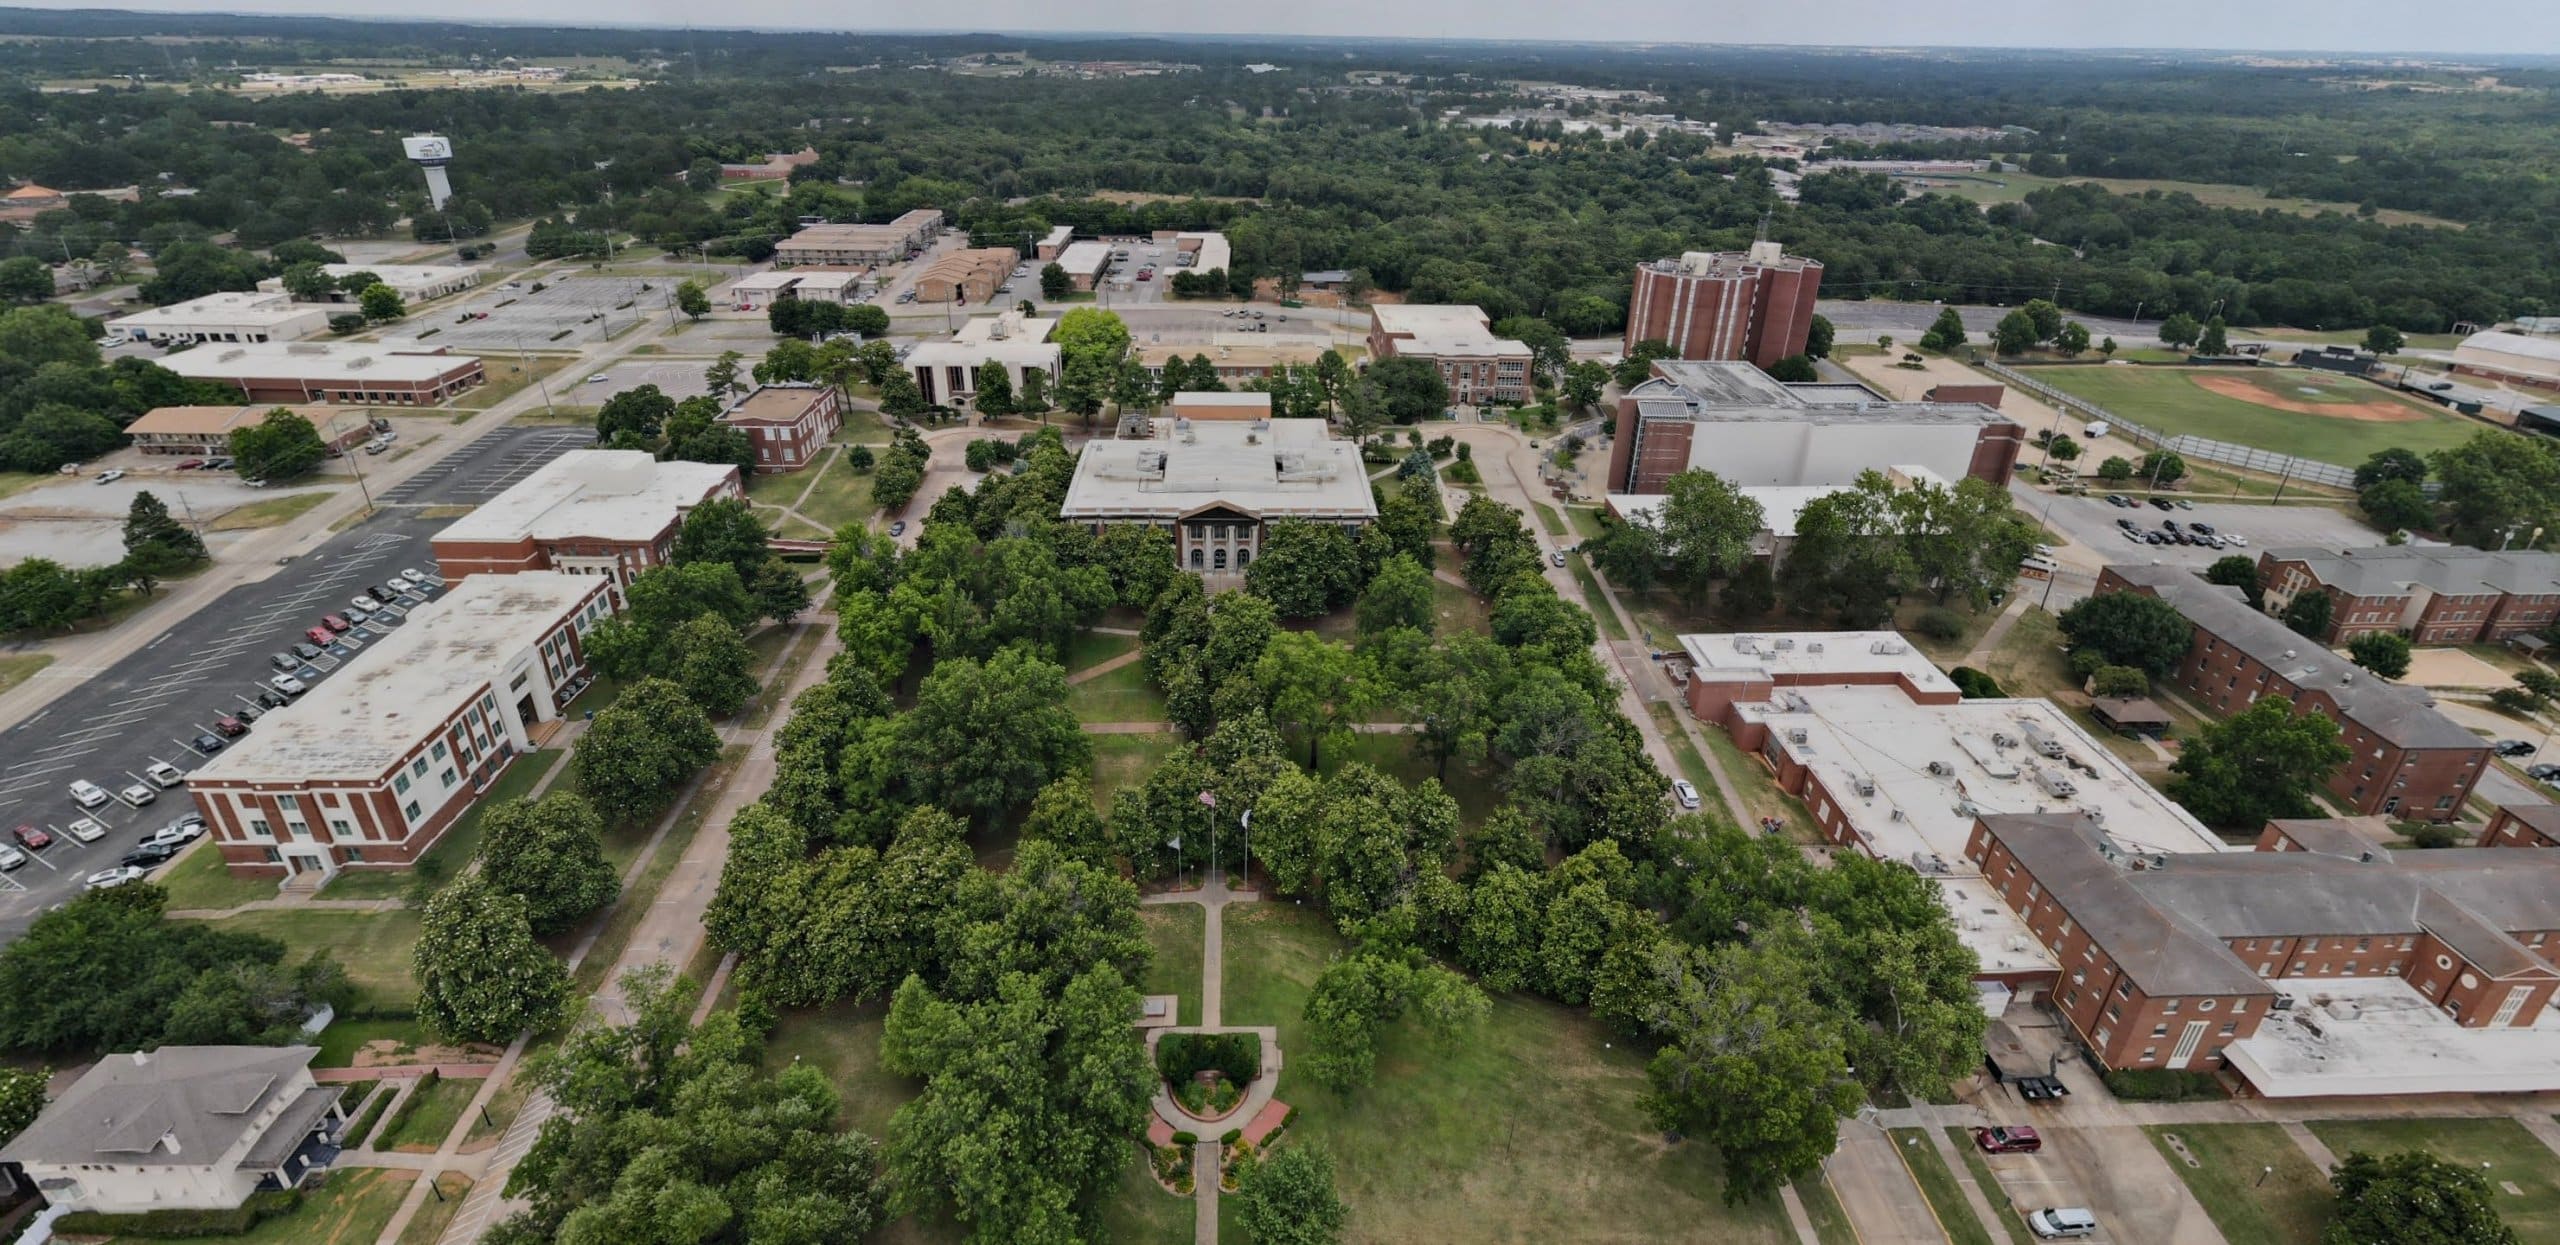 Oklahoma State University Spring 2022 Calendar Spring Break Scheduled For March 15-21 | Southeastern Oklahoma State  University